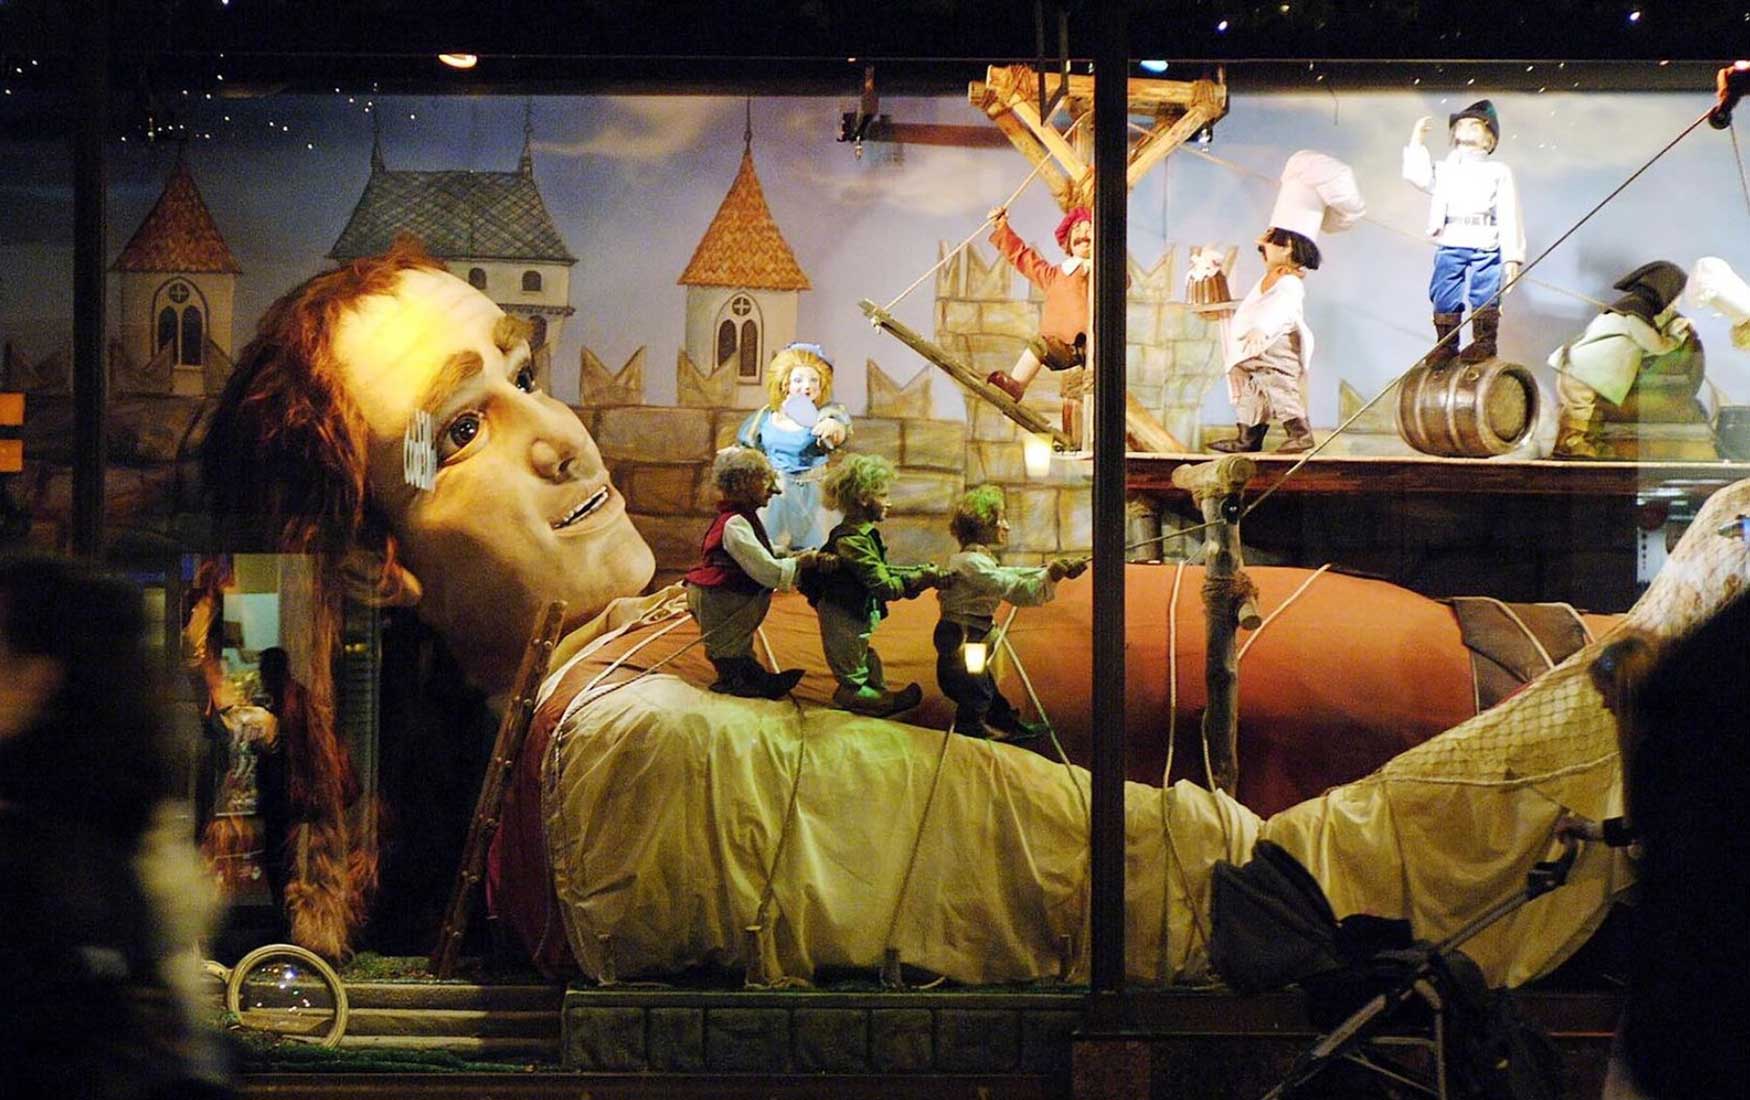 A huge figurine of a giant man lying down fills the Fenwick window display. Tiny figurines stand on top of him. This was a Gulliver's Travels themed window display at Fenwick Newcastle in 2006.